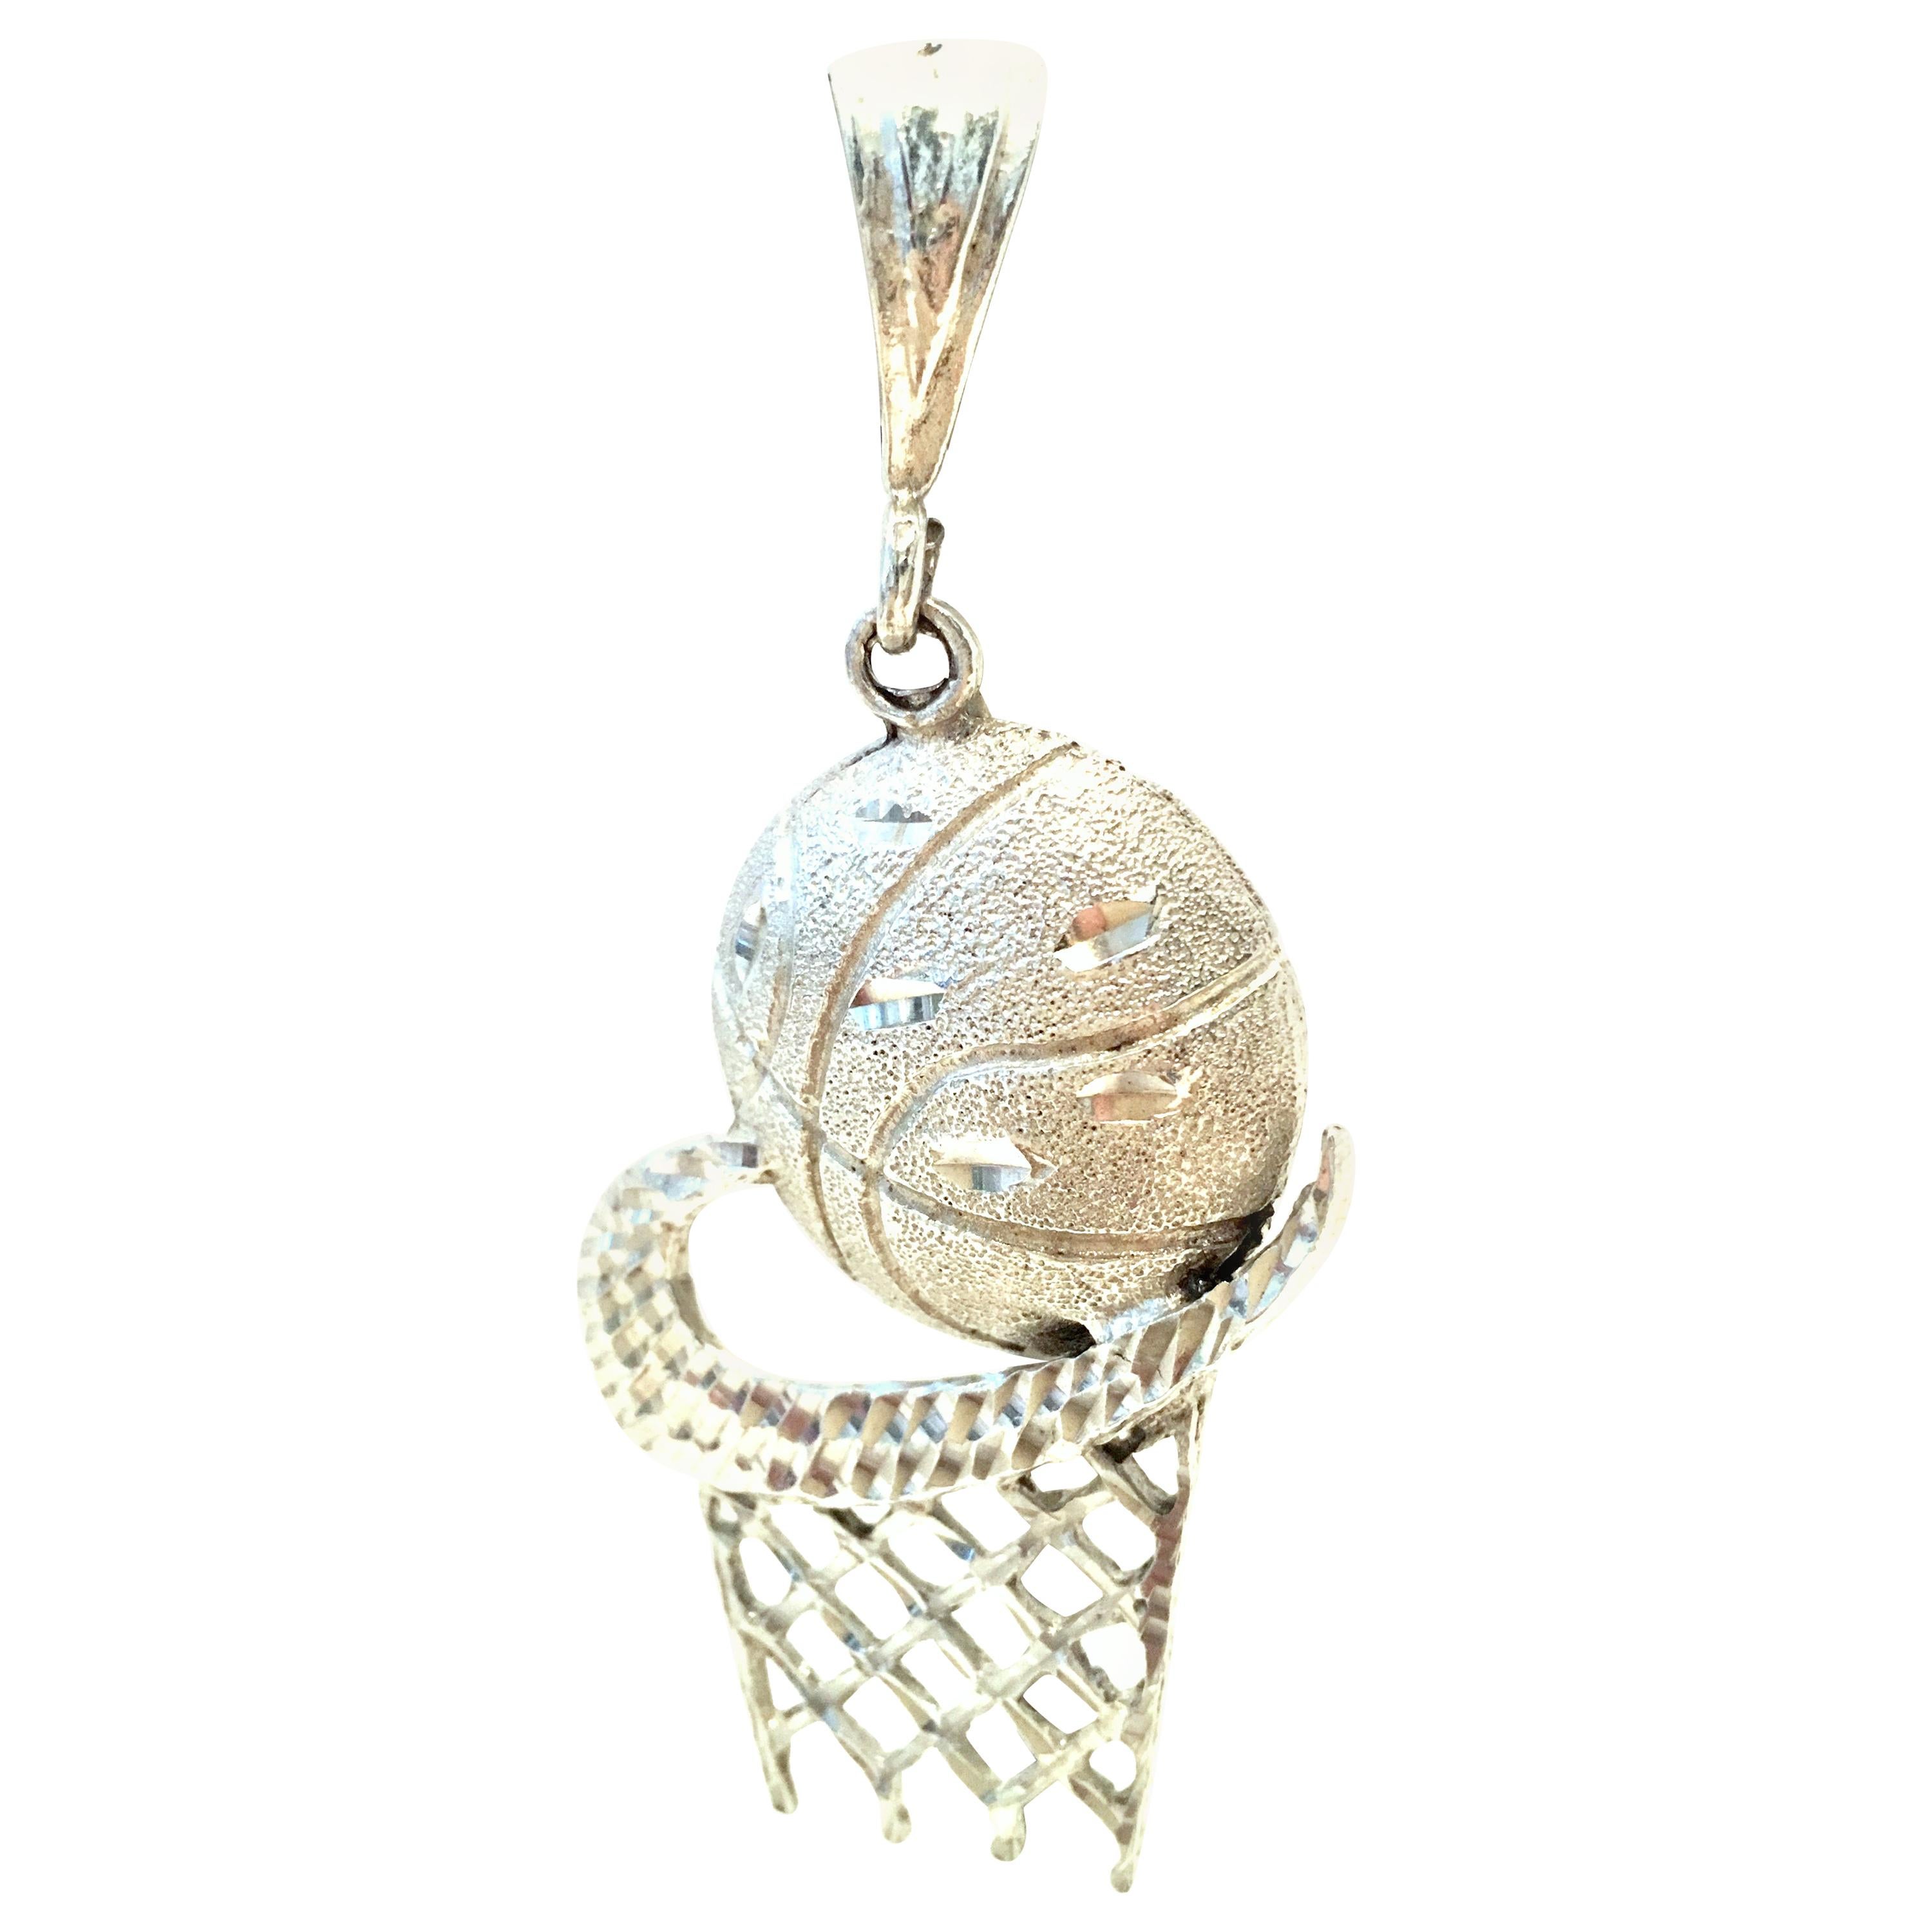 21st Century Italian 925 Sterling Silver Nike Style Basketball Necklace Pendant. For Sale